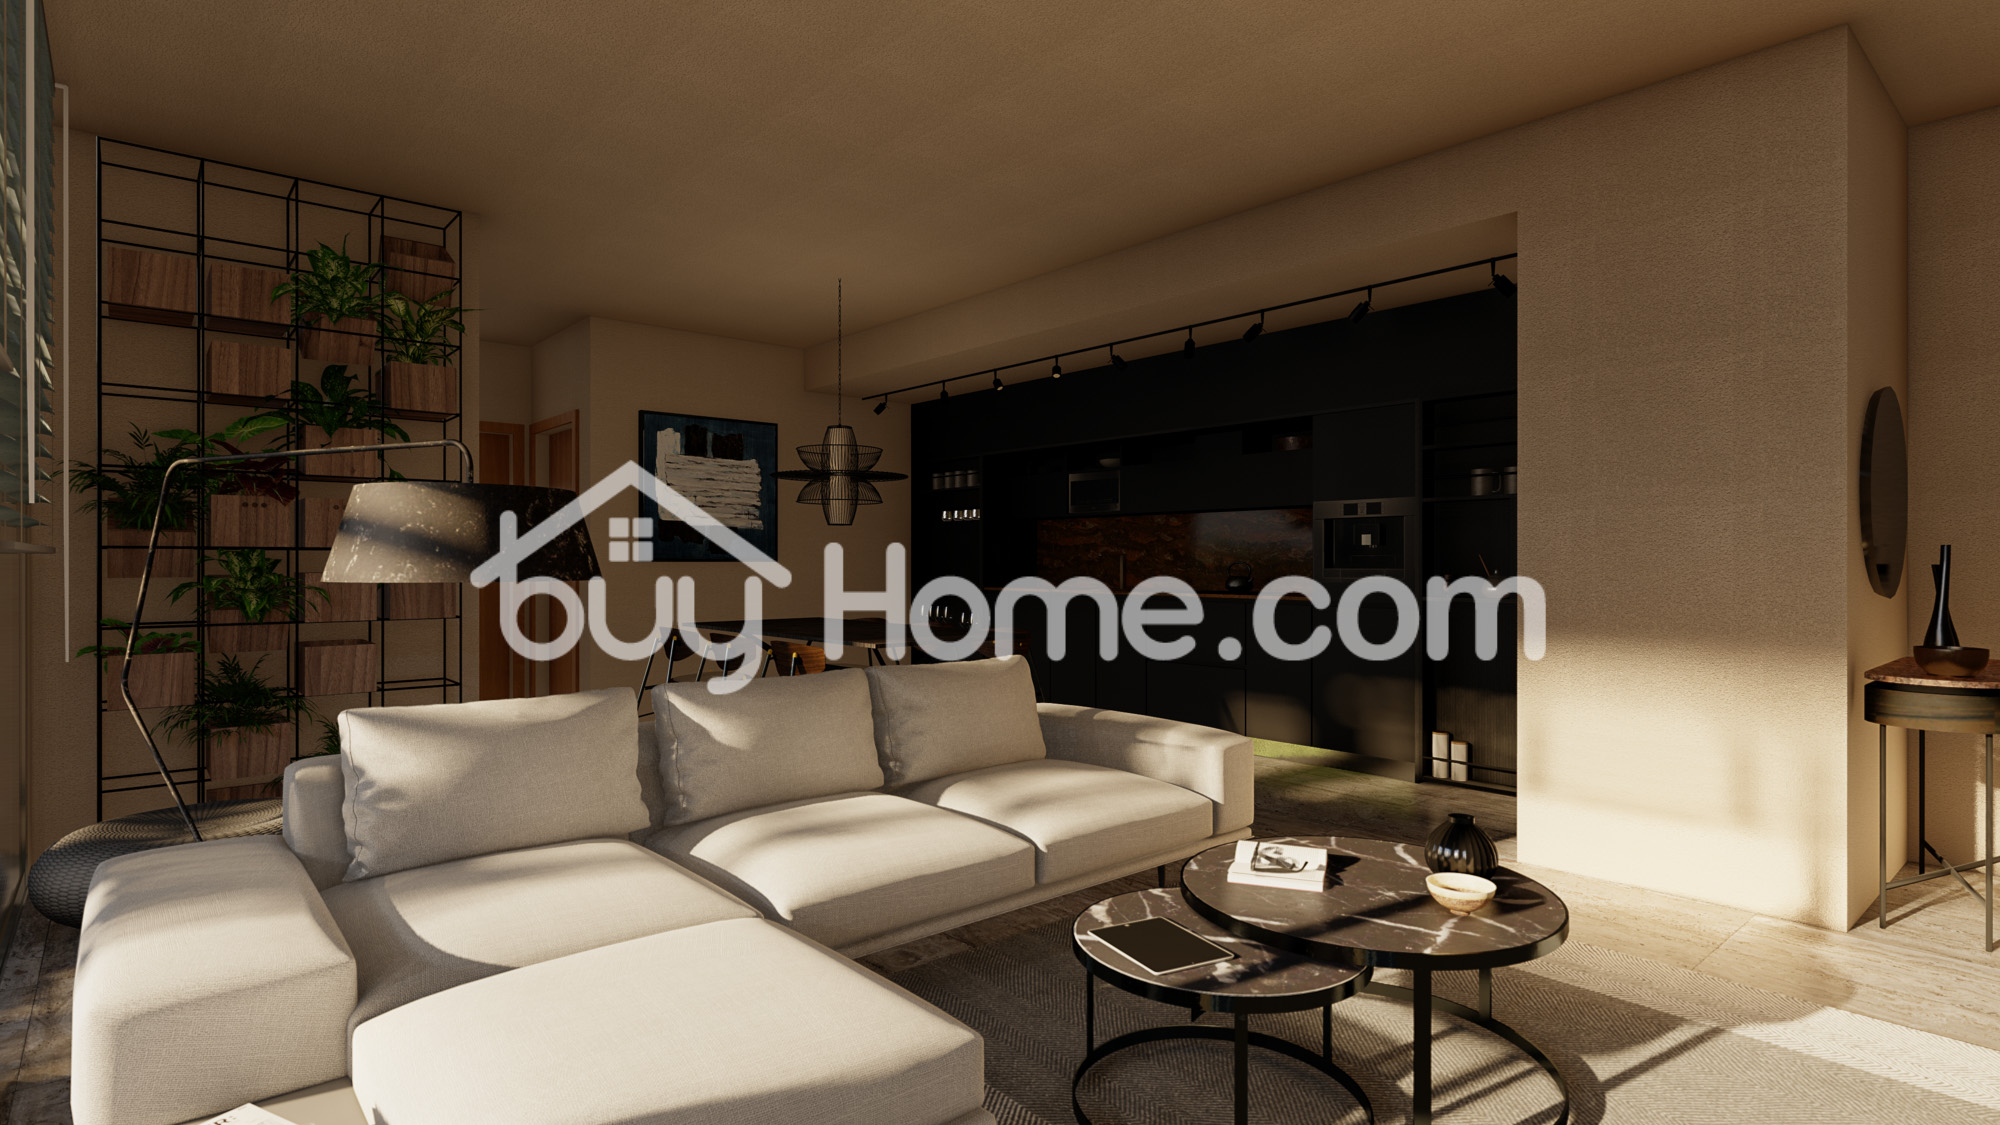 1 BDR apartment | BuyHome